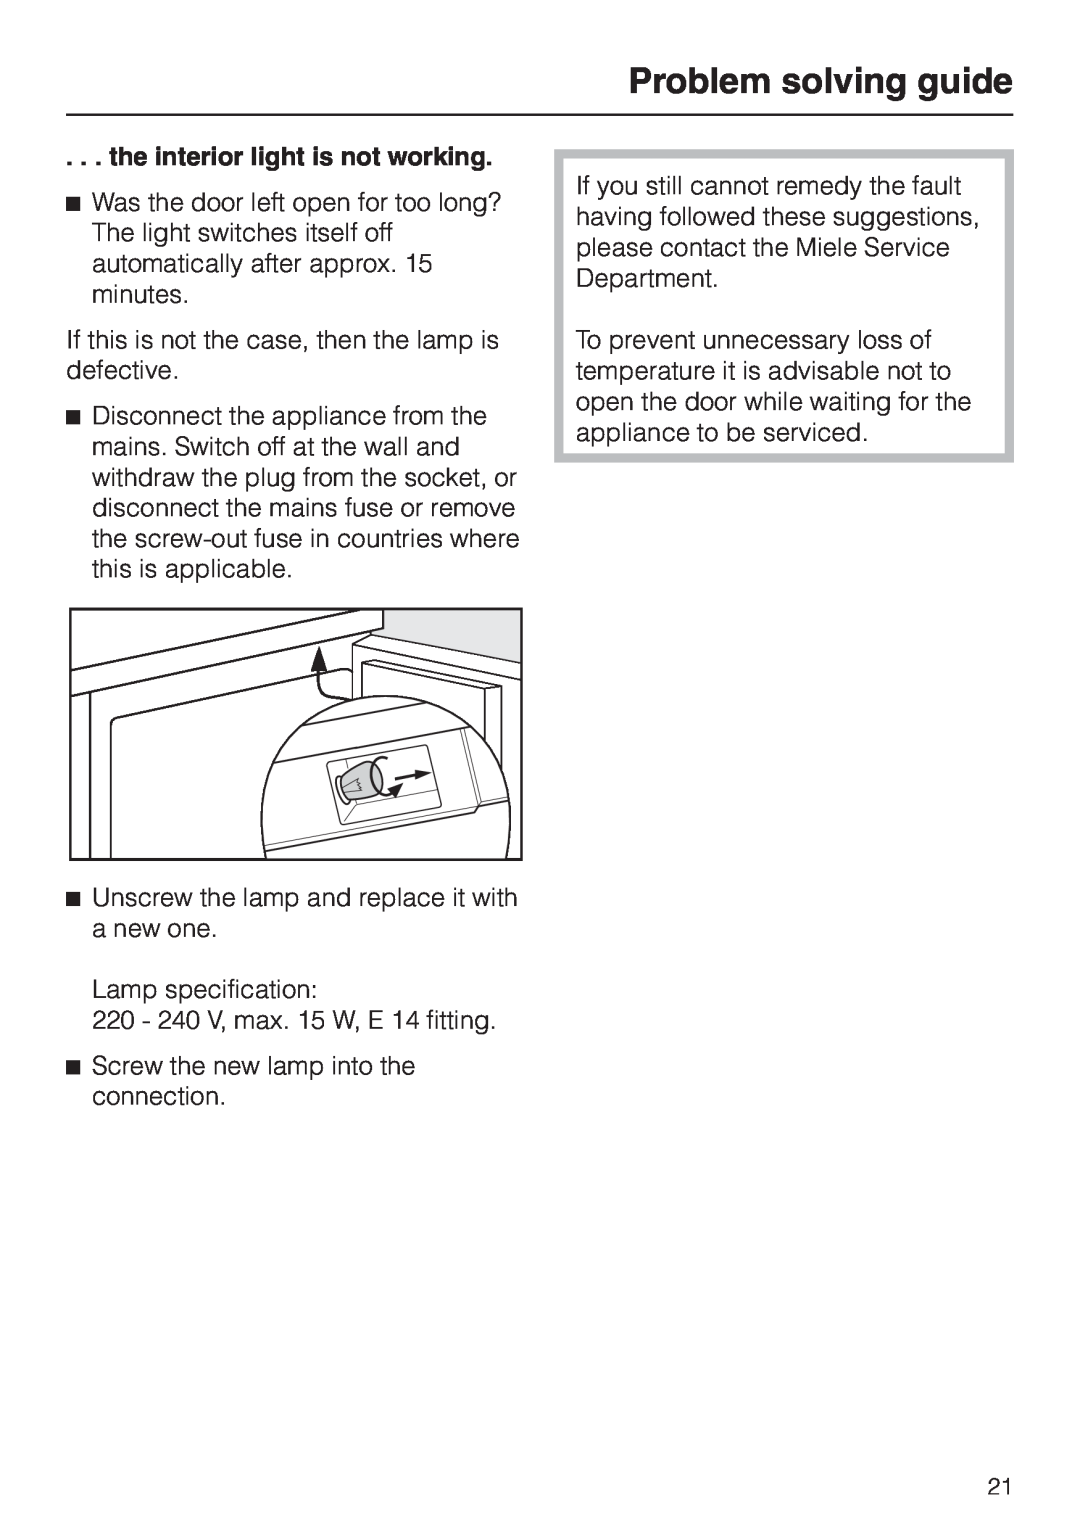 Miele KWL 4612 S, KWL 4812 S installation instructions the interior light is not working, Problem solving guide 